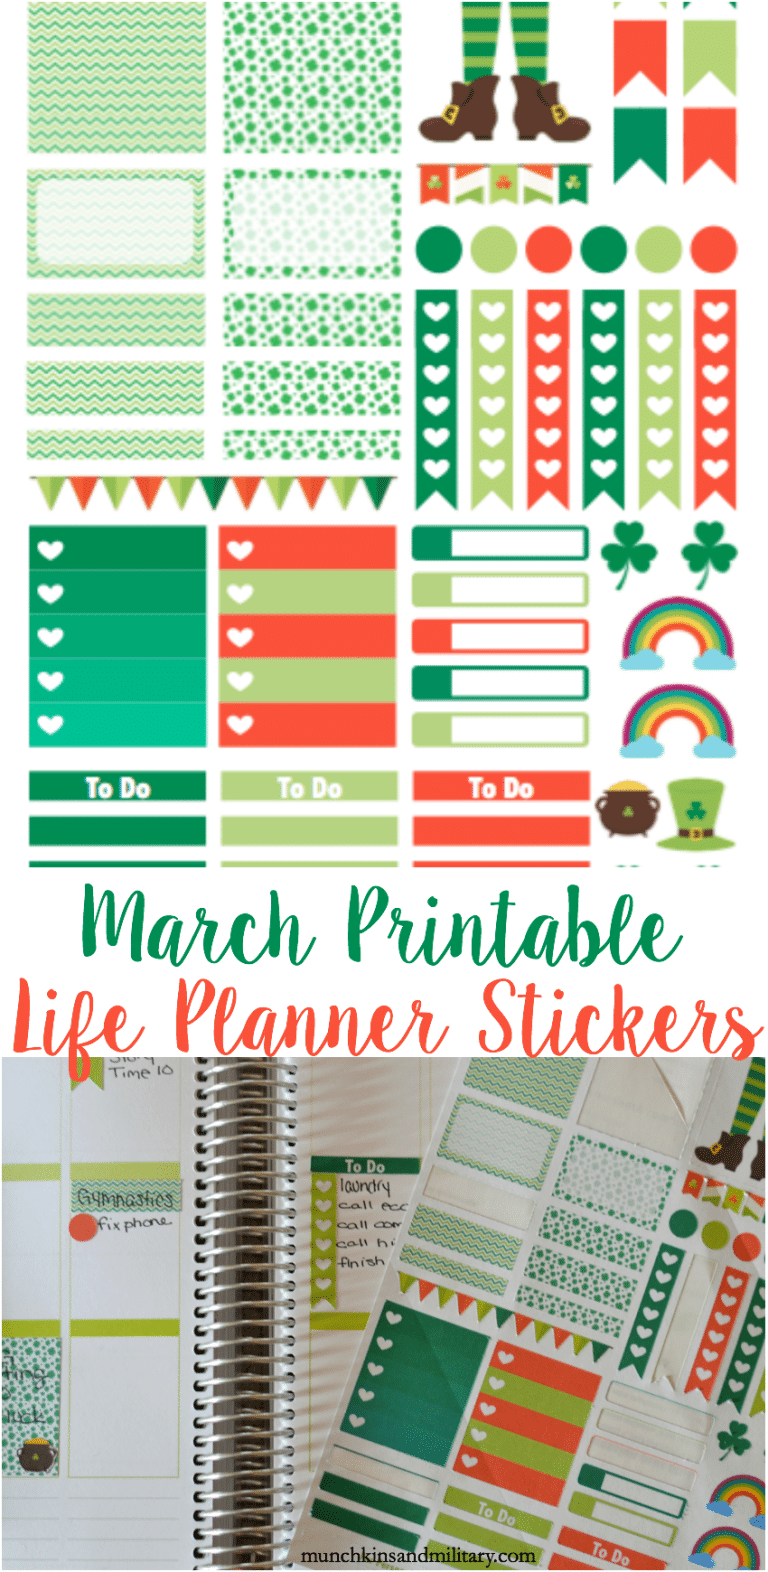 March Printable Planner Stickers